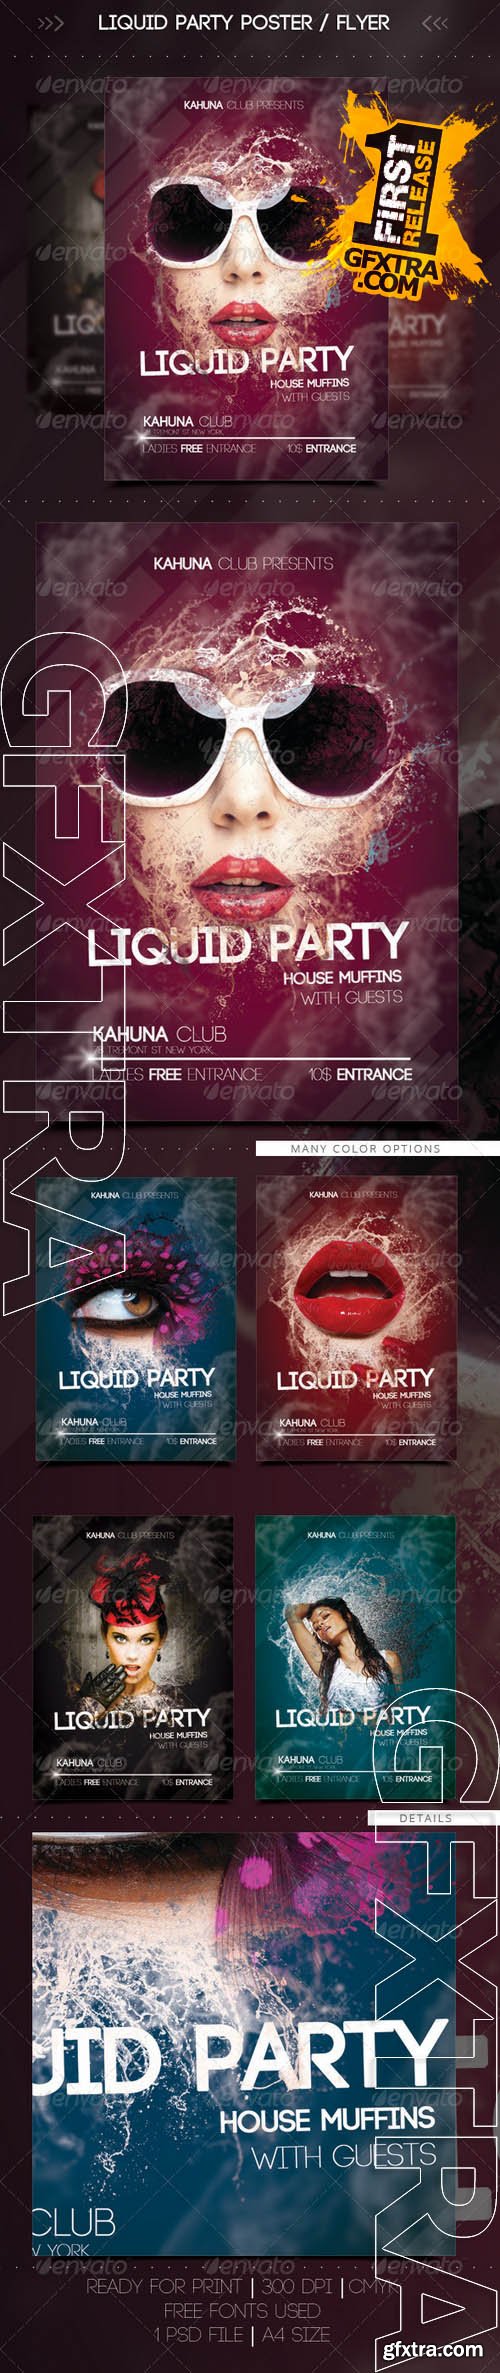 Wet Liquid Party Flyer / Poster - Graphicriver 7282123